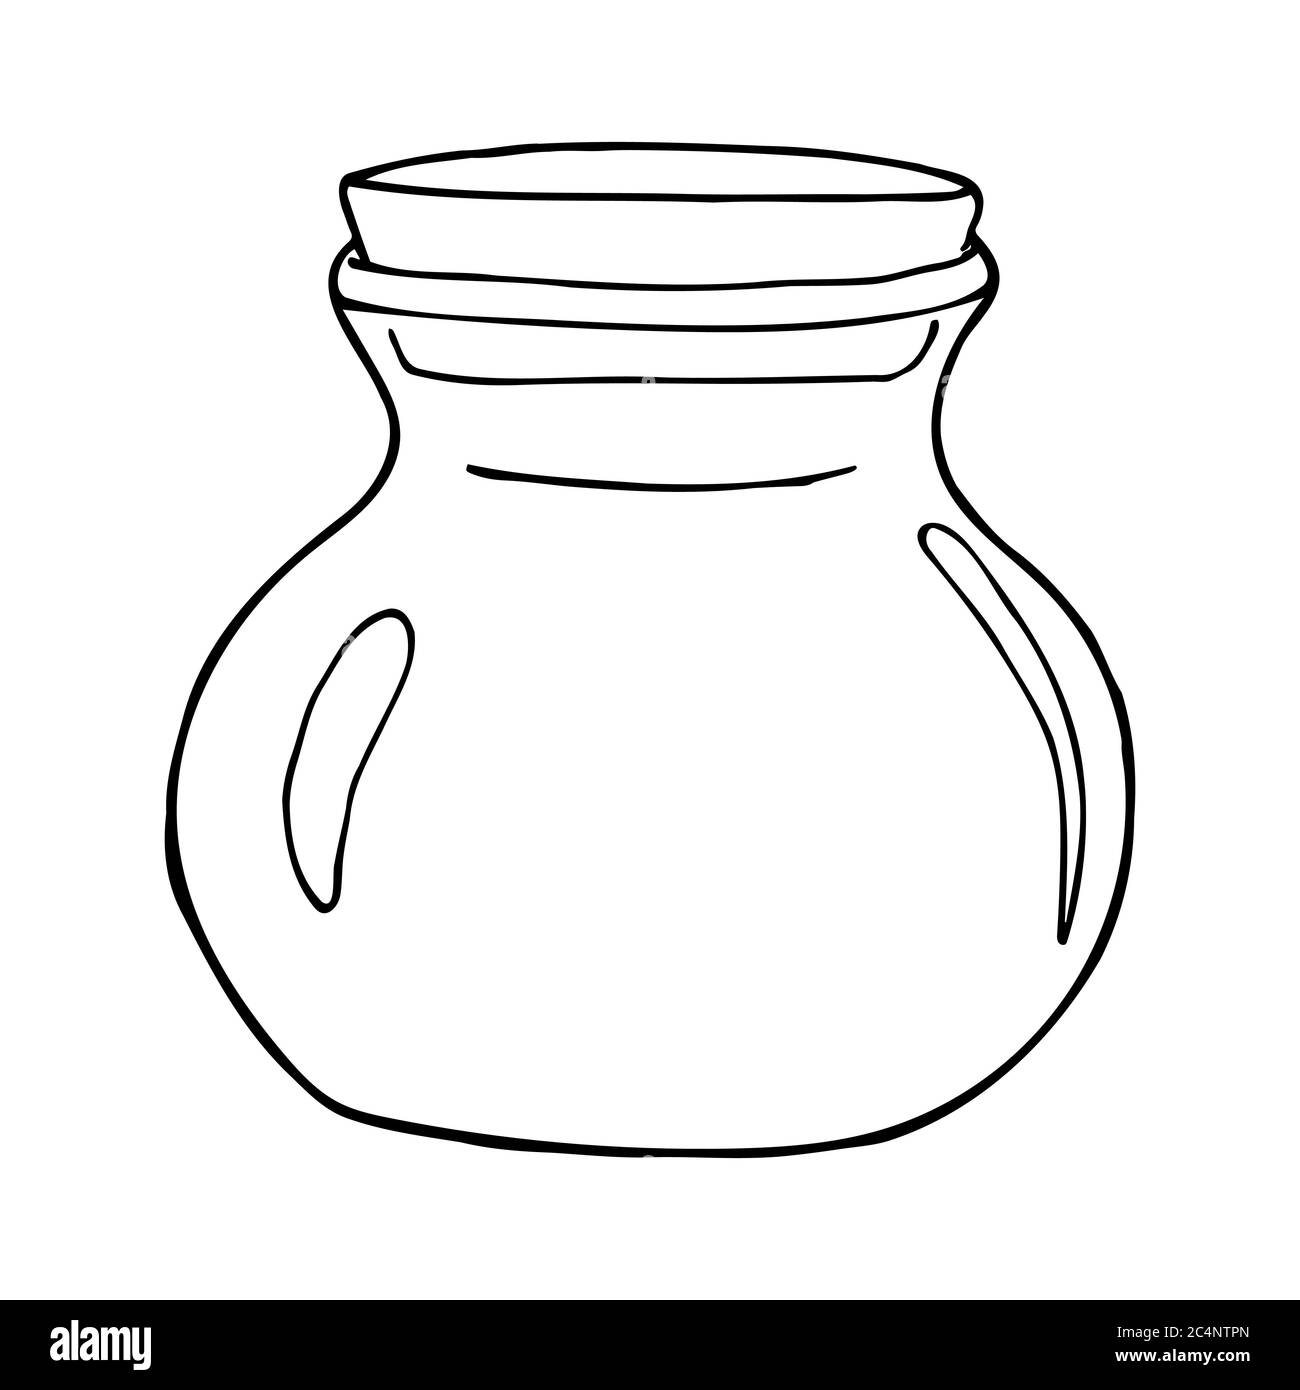 https://c8.alamy.com/comp/2C4NTPN/hand-drawn-jar-contour-sketch-kitchen-objects-doodle-style-vector-illustration-isolated-on-white-background-alchemy-and-vintage-2C4NTPN.jpg